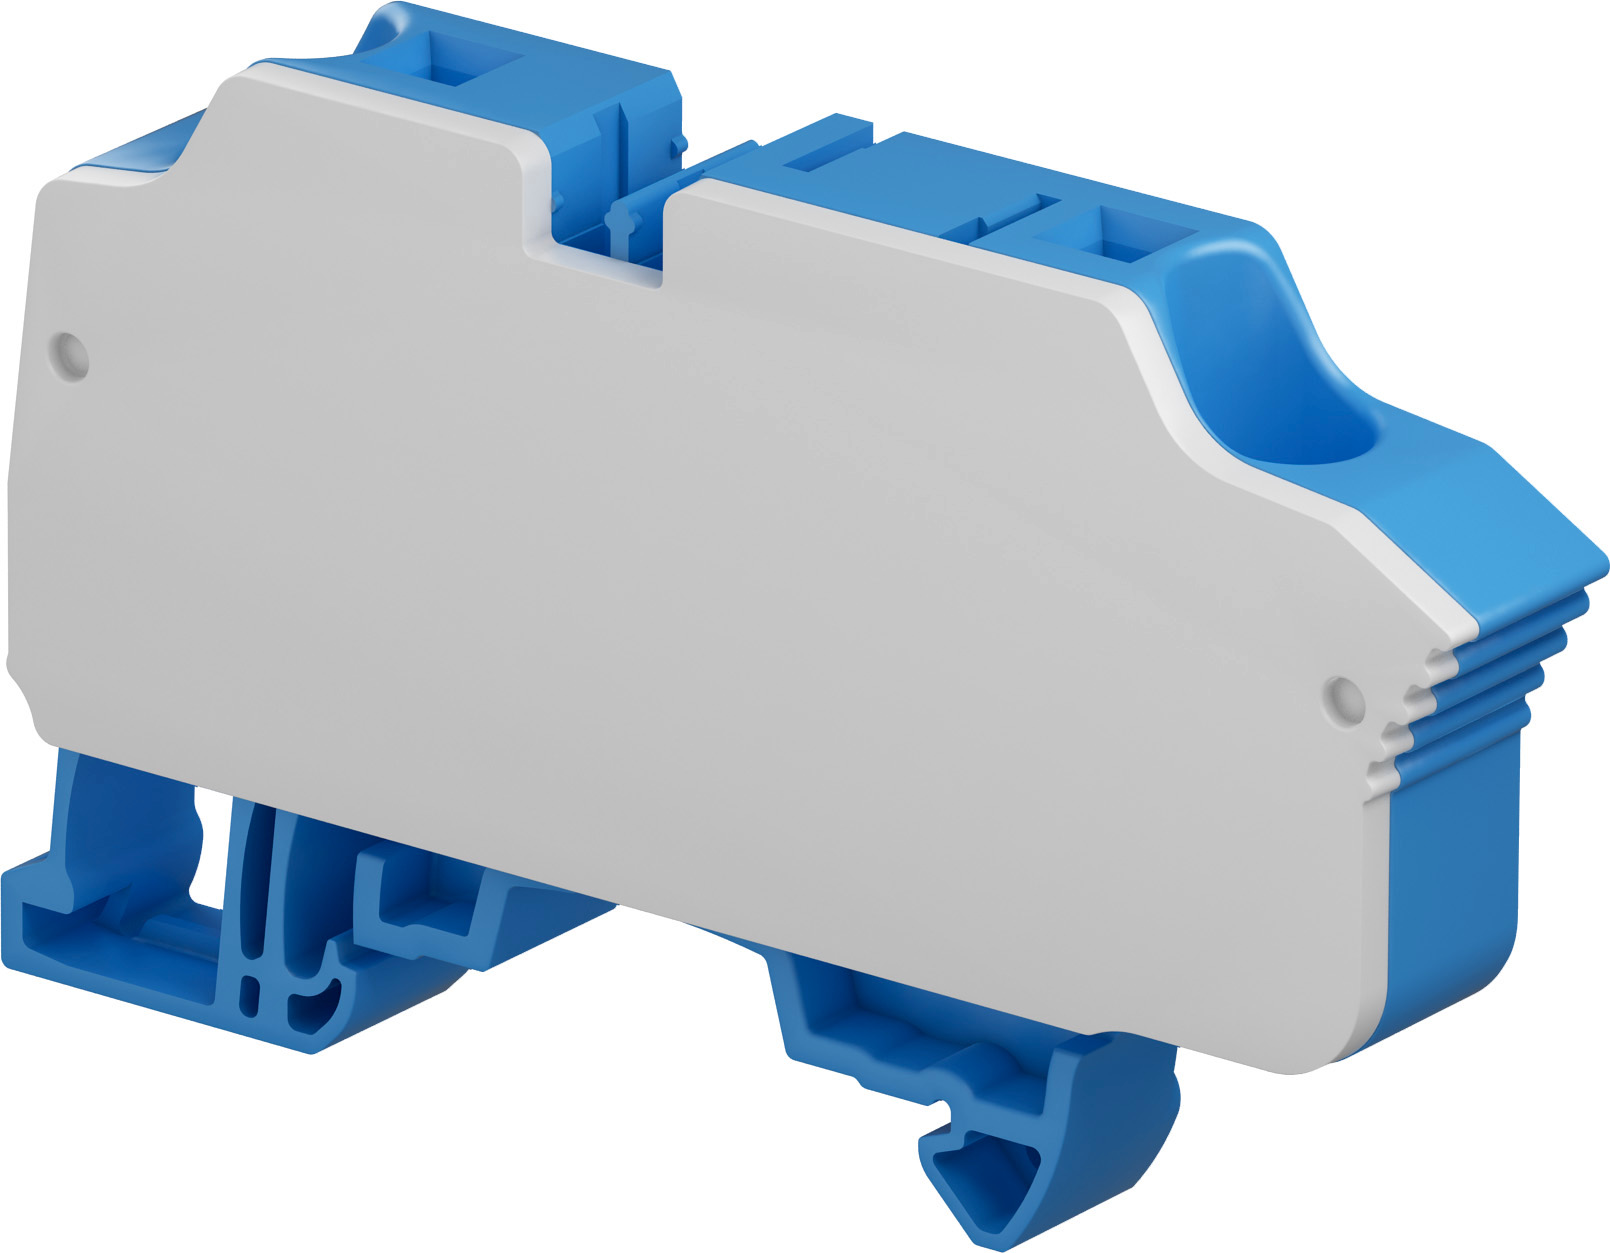 New Connector and Cable Products: March 2019 - TE Connectivity’s new ZK-PV PI-Spring range of TE ENTRELEC terminal blocks